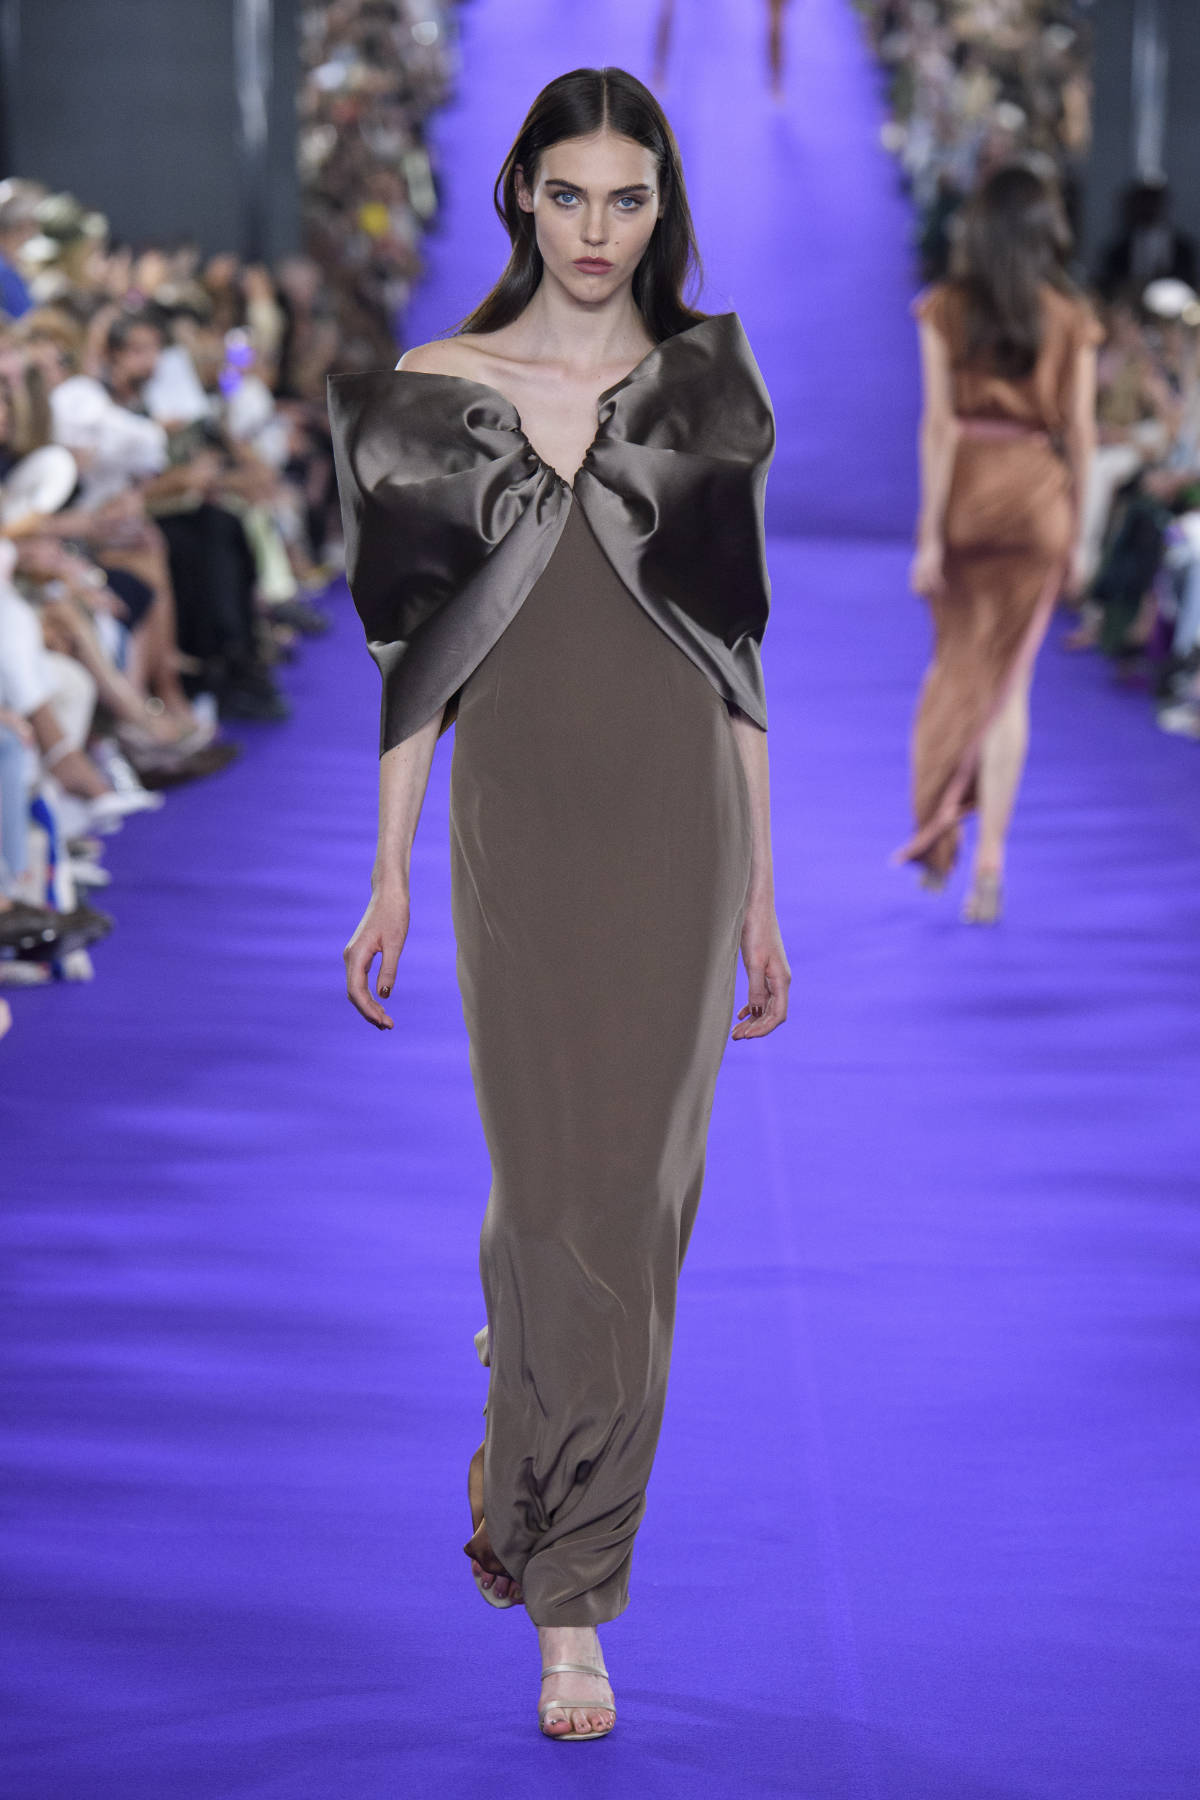 Alexis Mabille Presents Its New Haute Couture Fall-Winter 2022/2023 Collection